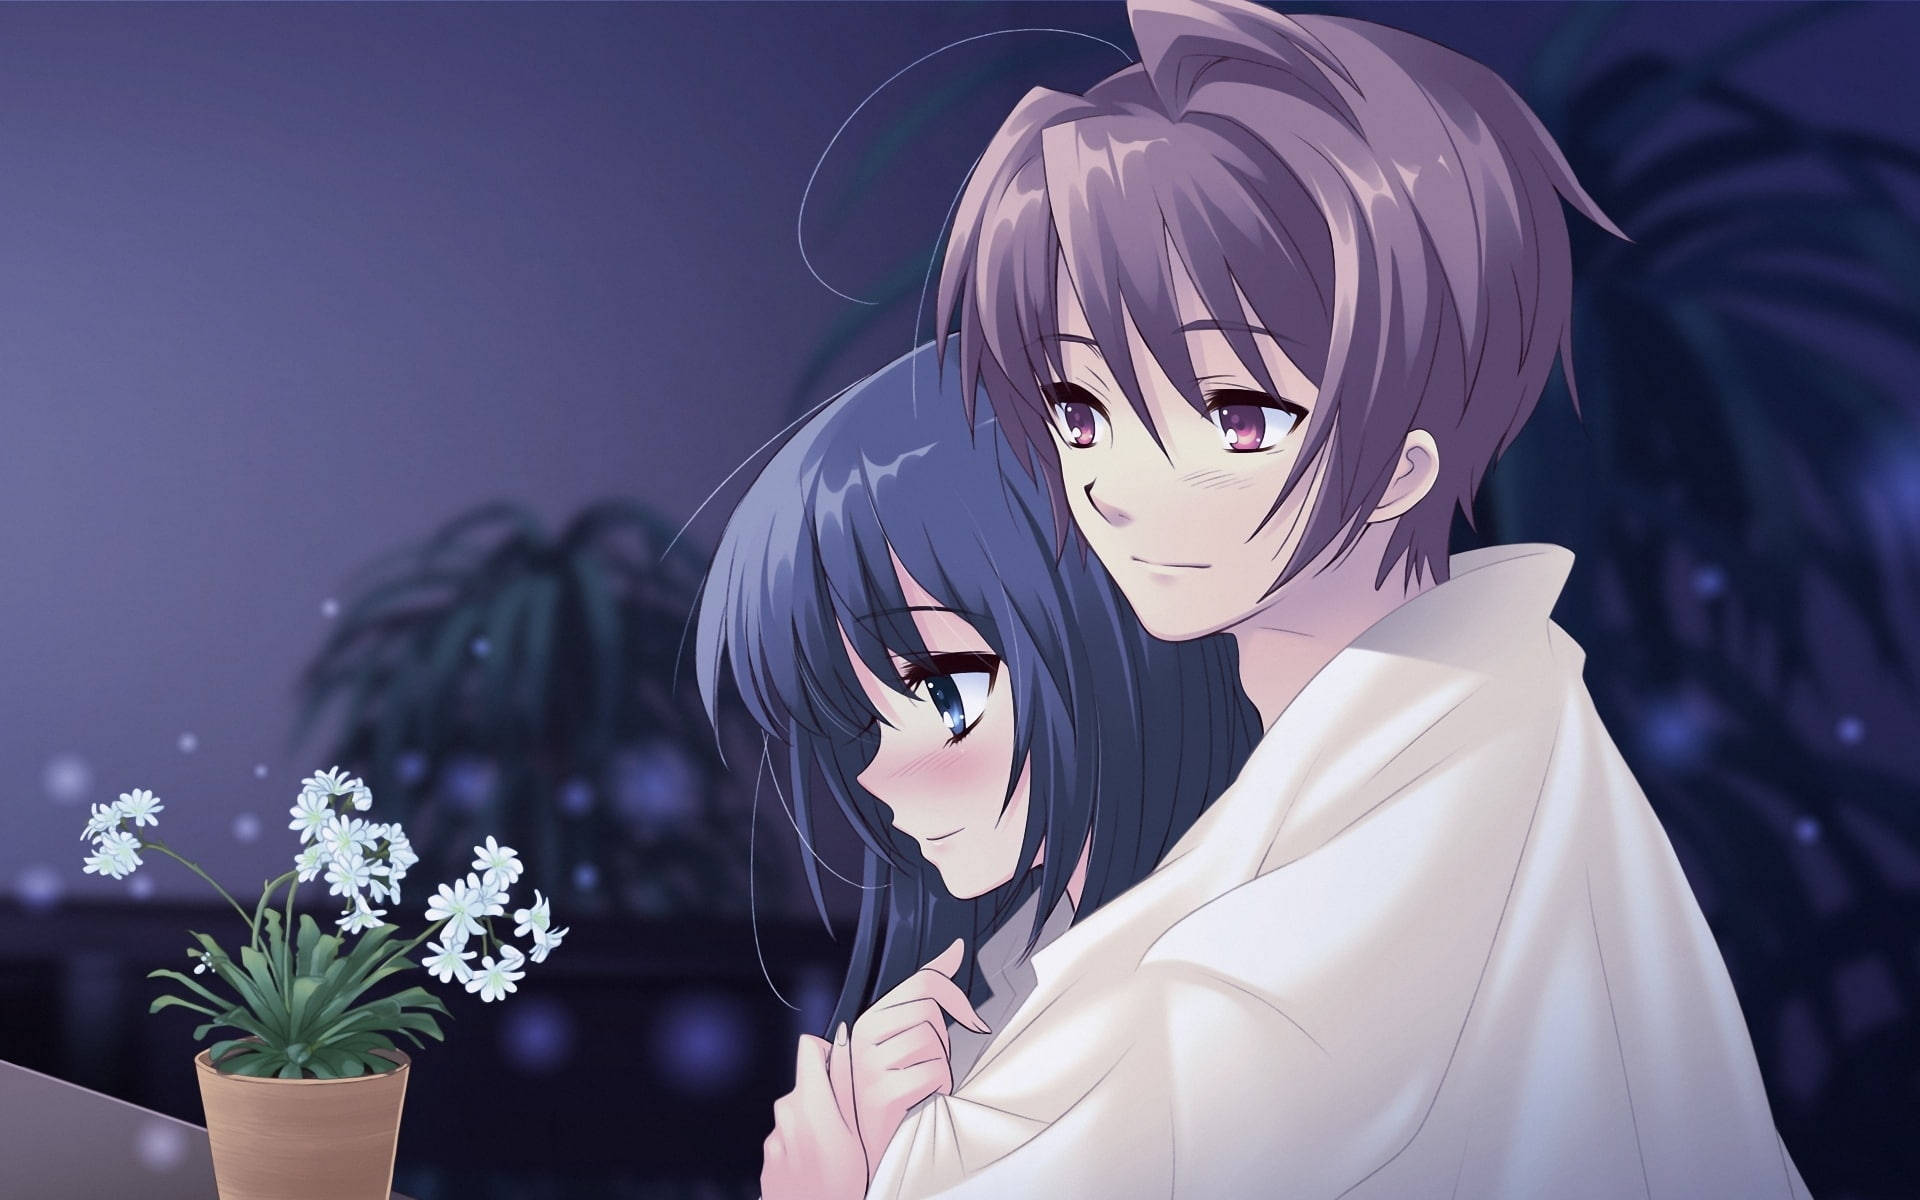 Cute Anime Couple And Potted Flowers Background